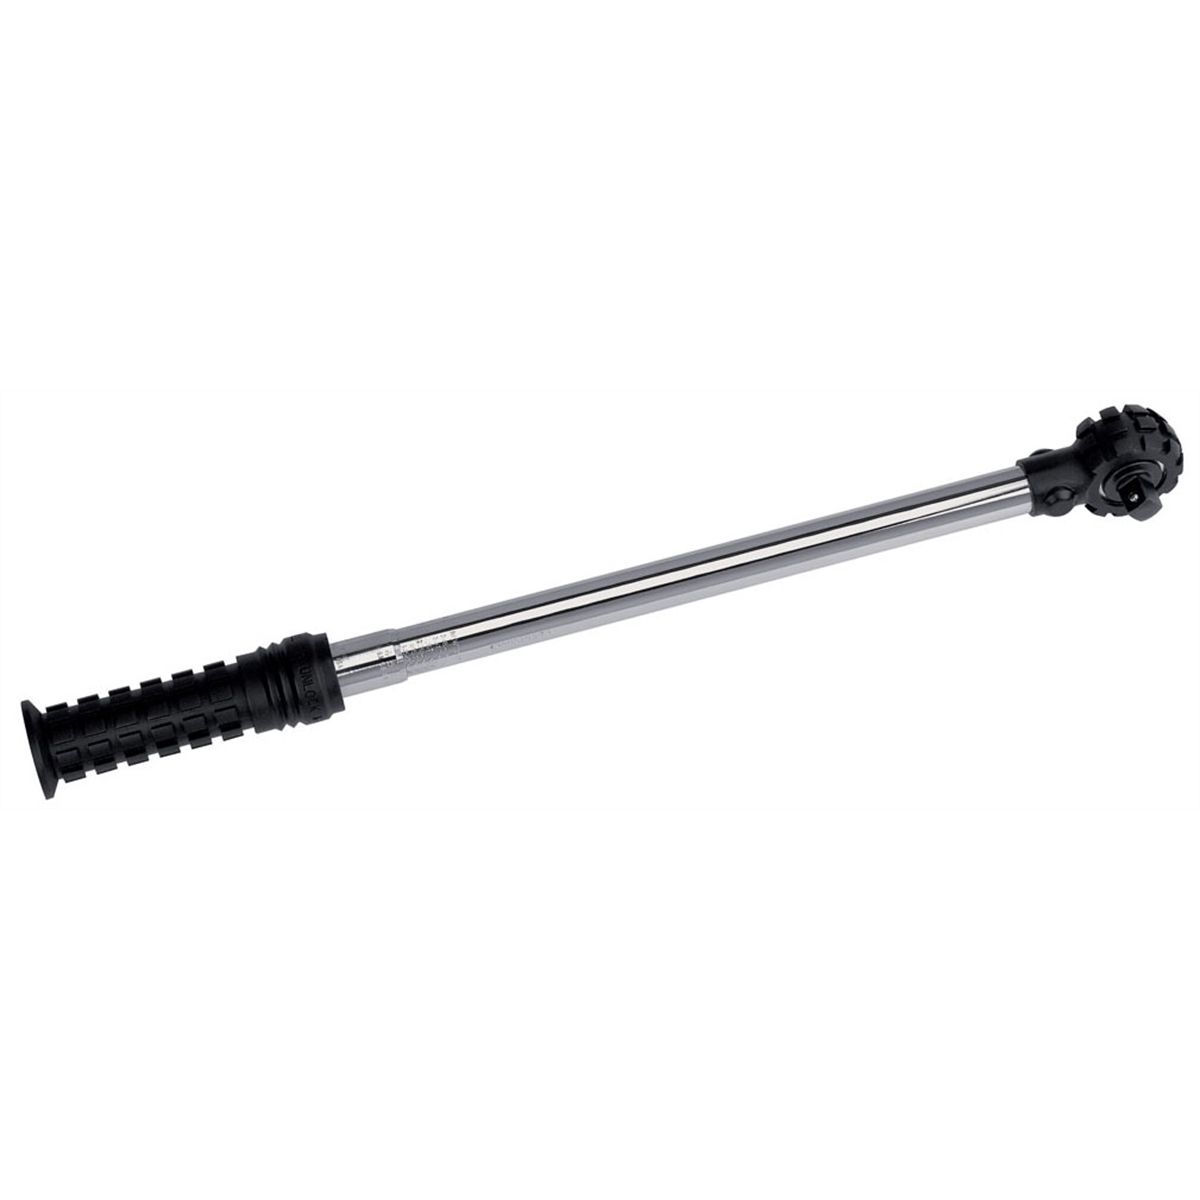 OTC 7378 1/2 In Sq Dr Accutorq Clikker Torque Wrench 50-250 Ft